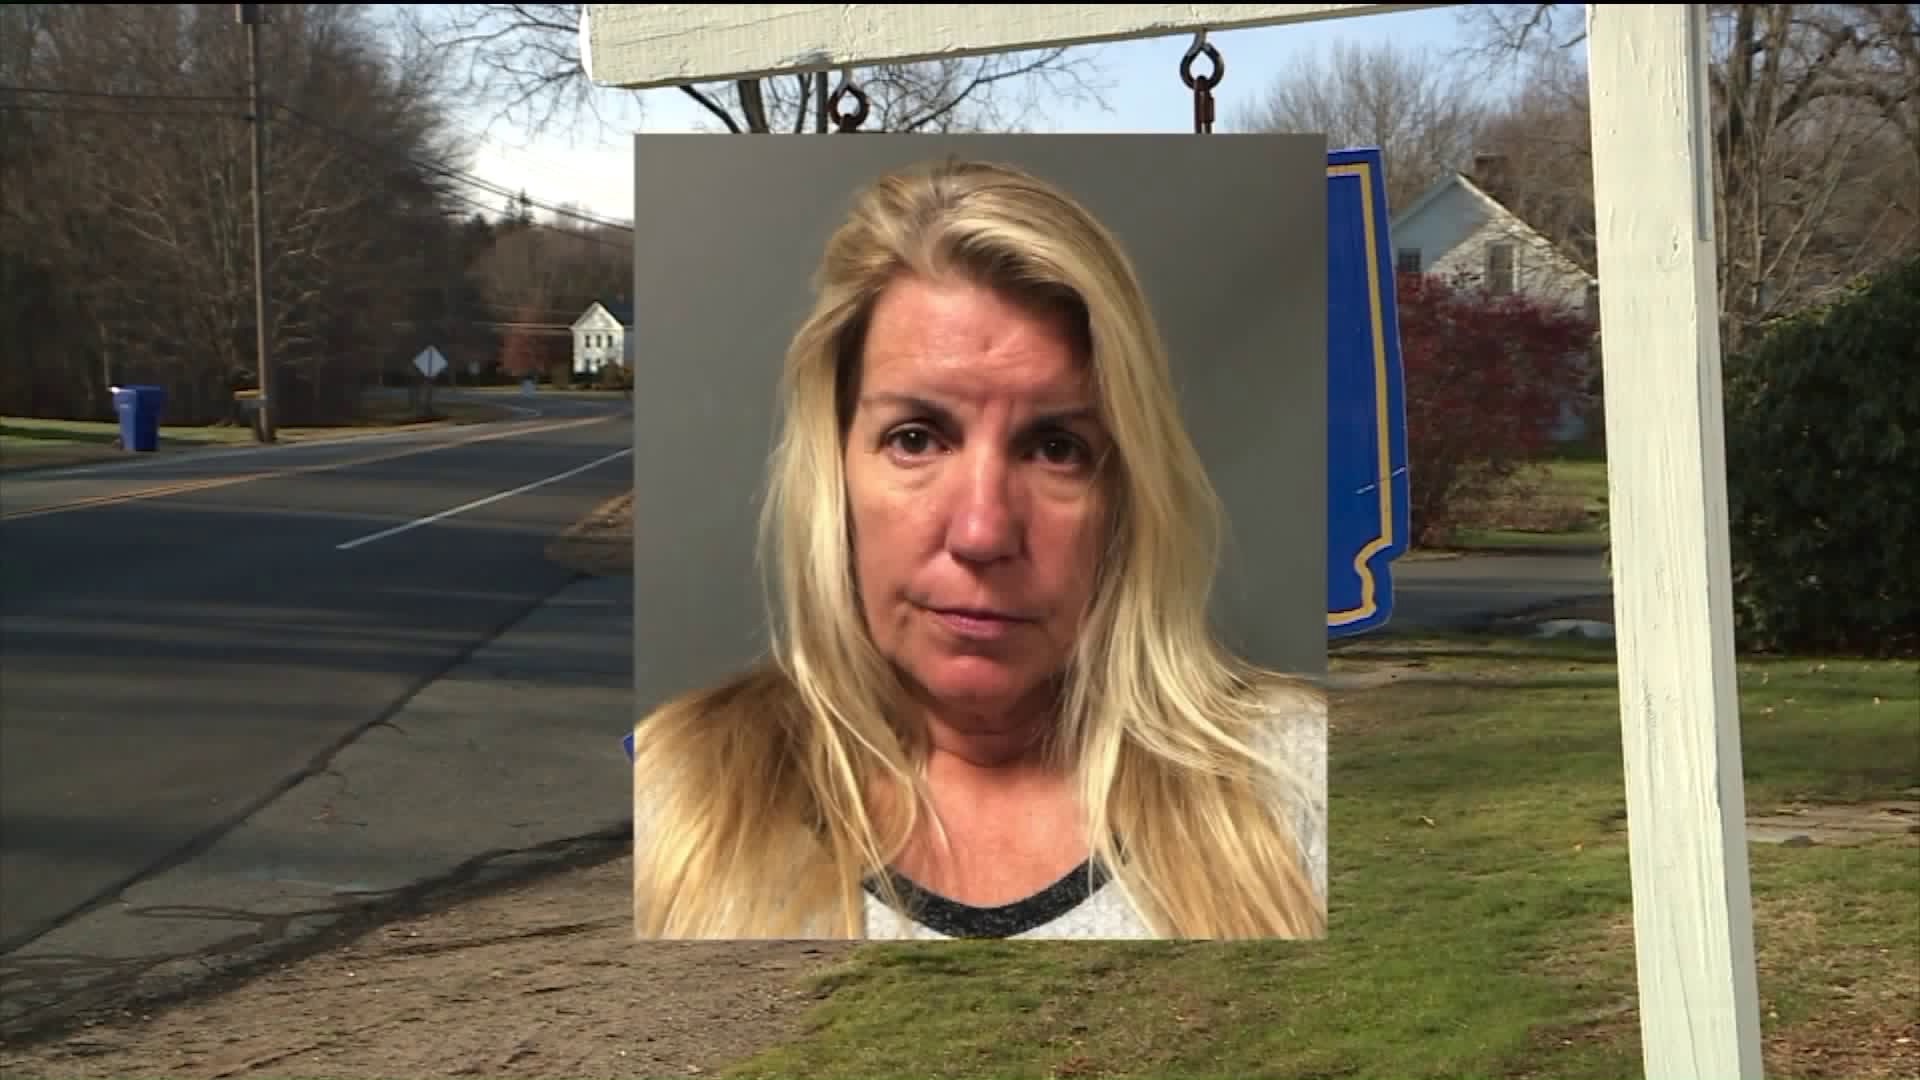 Bolton BoE member resigns after arrest in connection with teen party with alcohol at her home